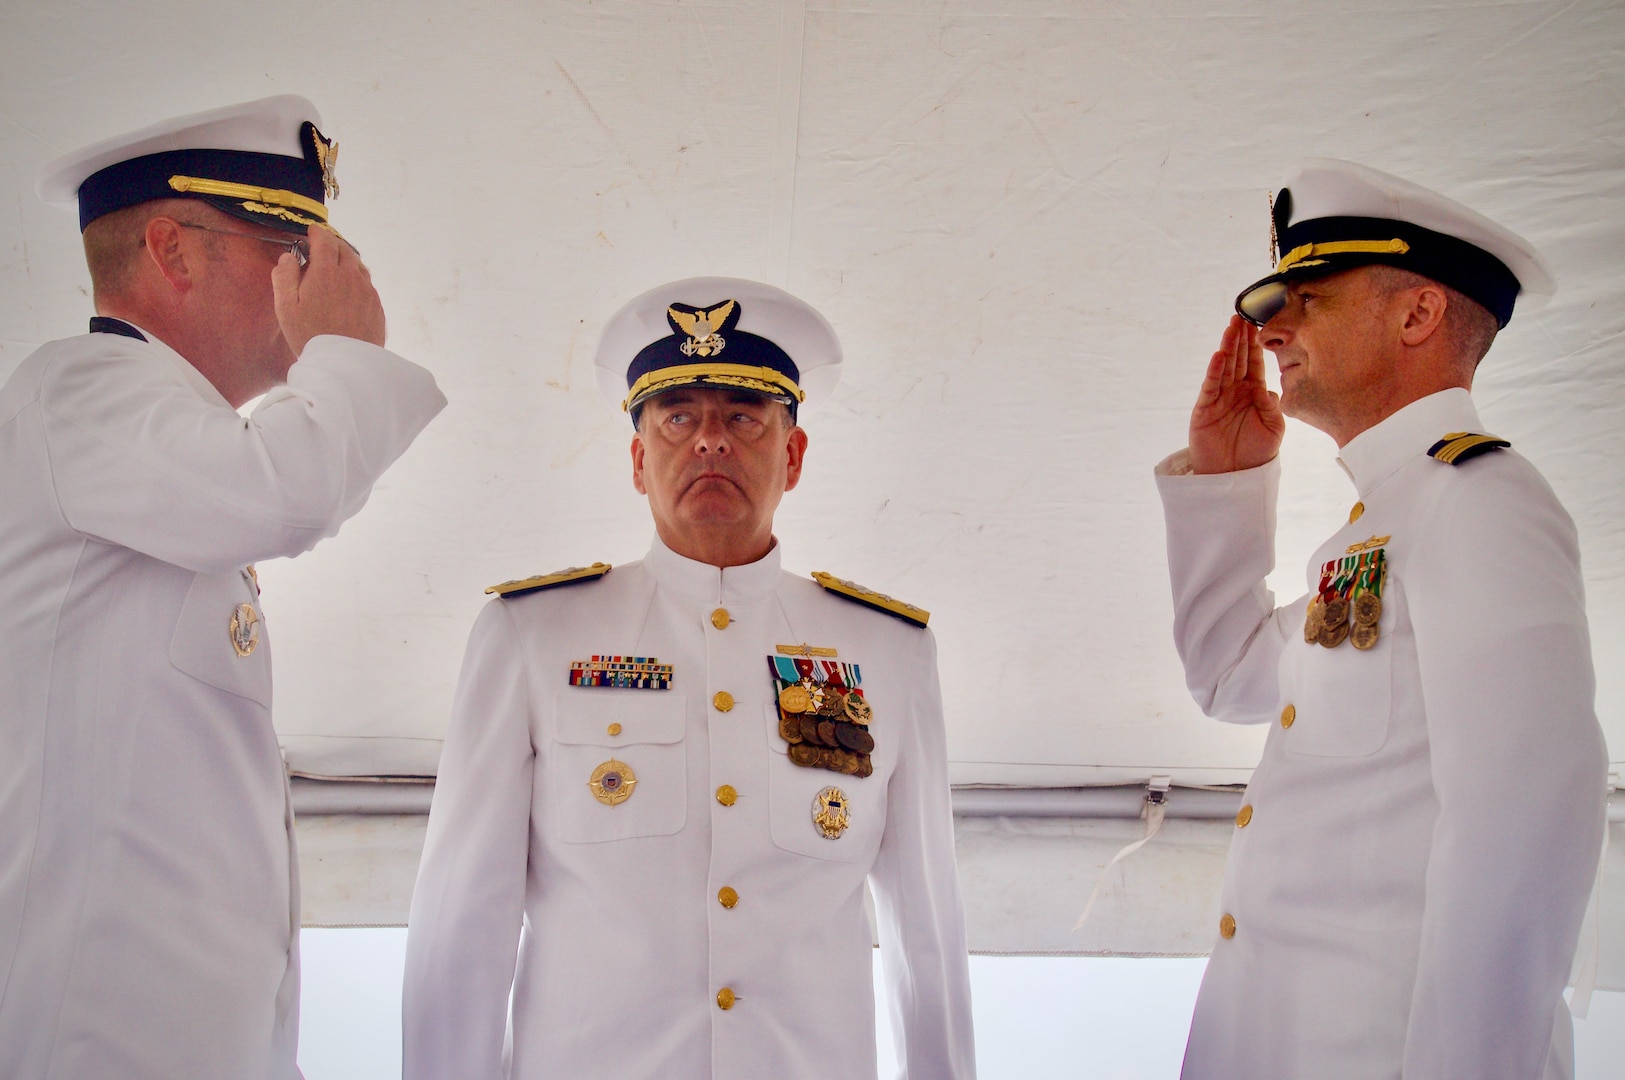 Capt. Rob Kistner takes command of U.S. Coast Guard Forces Micronesia Sector Guam from Capt. Nick Simmons in a change of command ceremony at Victor Pier in Apra Harbor, Guam, on May 23, 2024. Rear Adm. Michael Day, U.S. Coast Guard 14th District commander, presided over the ceremony. Hailing from Tallahassee, Florida, Capt. Simmons leaves Guam to rejoin the staff at U.S. Coast Guard Headquarters as the chief of the Office of Budget and Programs (CG-82). Capt. Rob Kistner, a native of Rochester, New York, joins the Forces Micronesia team after serving as the chief of Prevention for the U.S. Coast Guard 14th District. (U.S. Coast Guard photo by Josiah Moss)